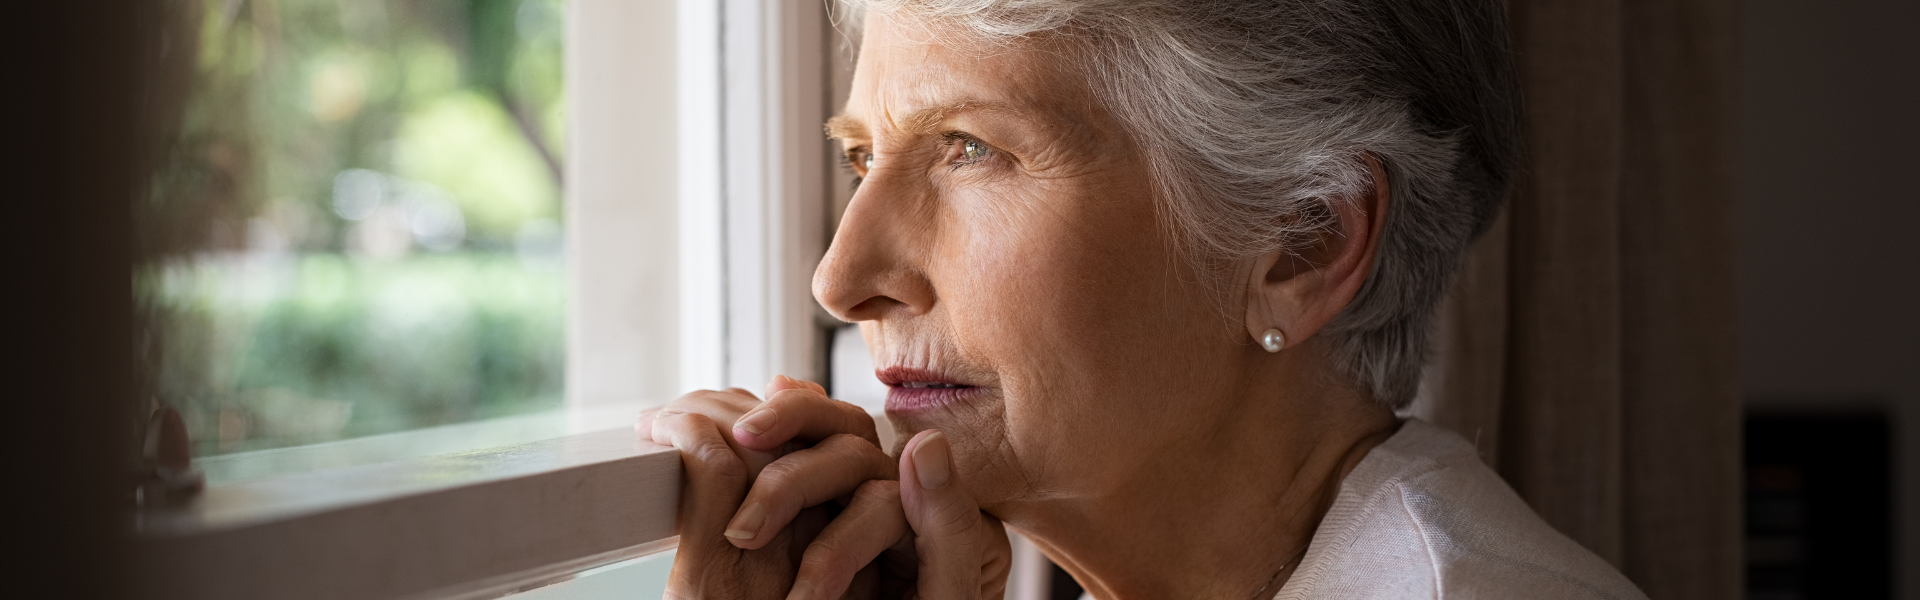 Image of woman looking out a window